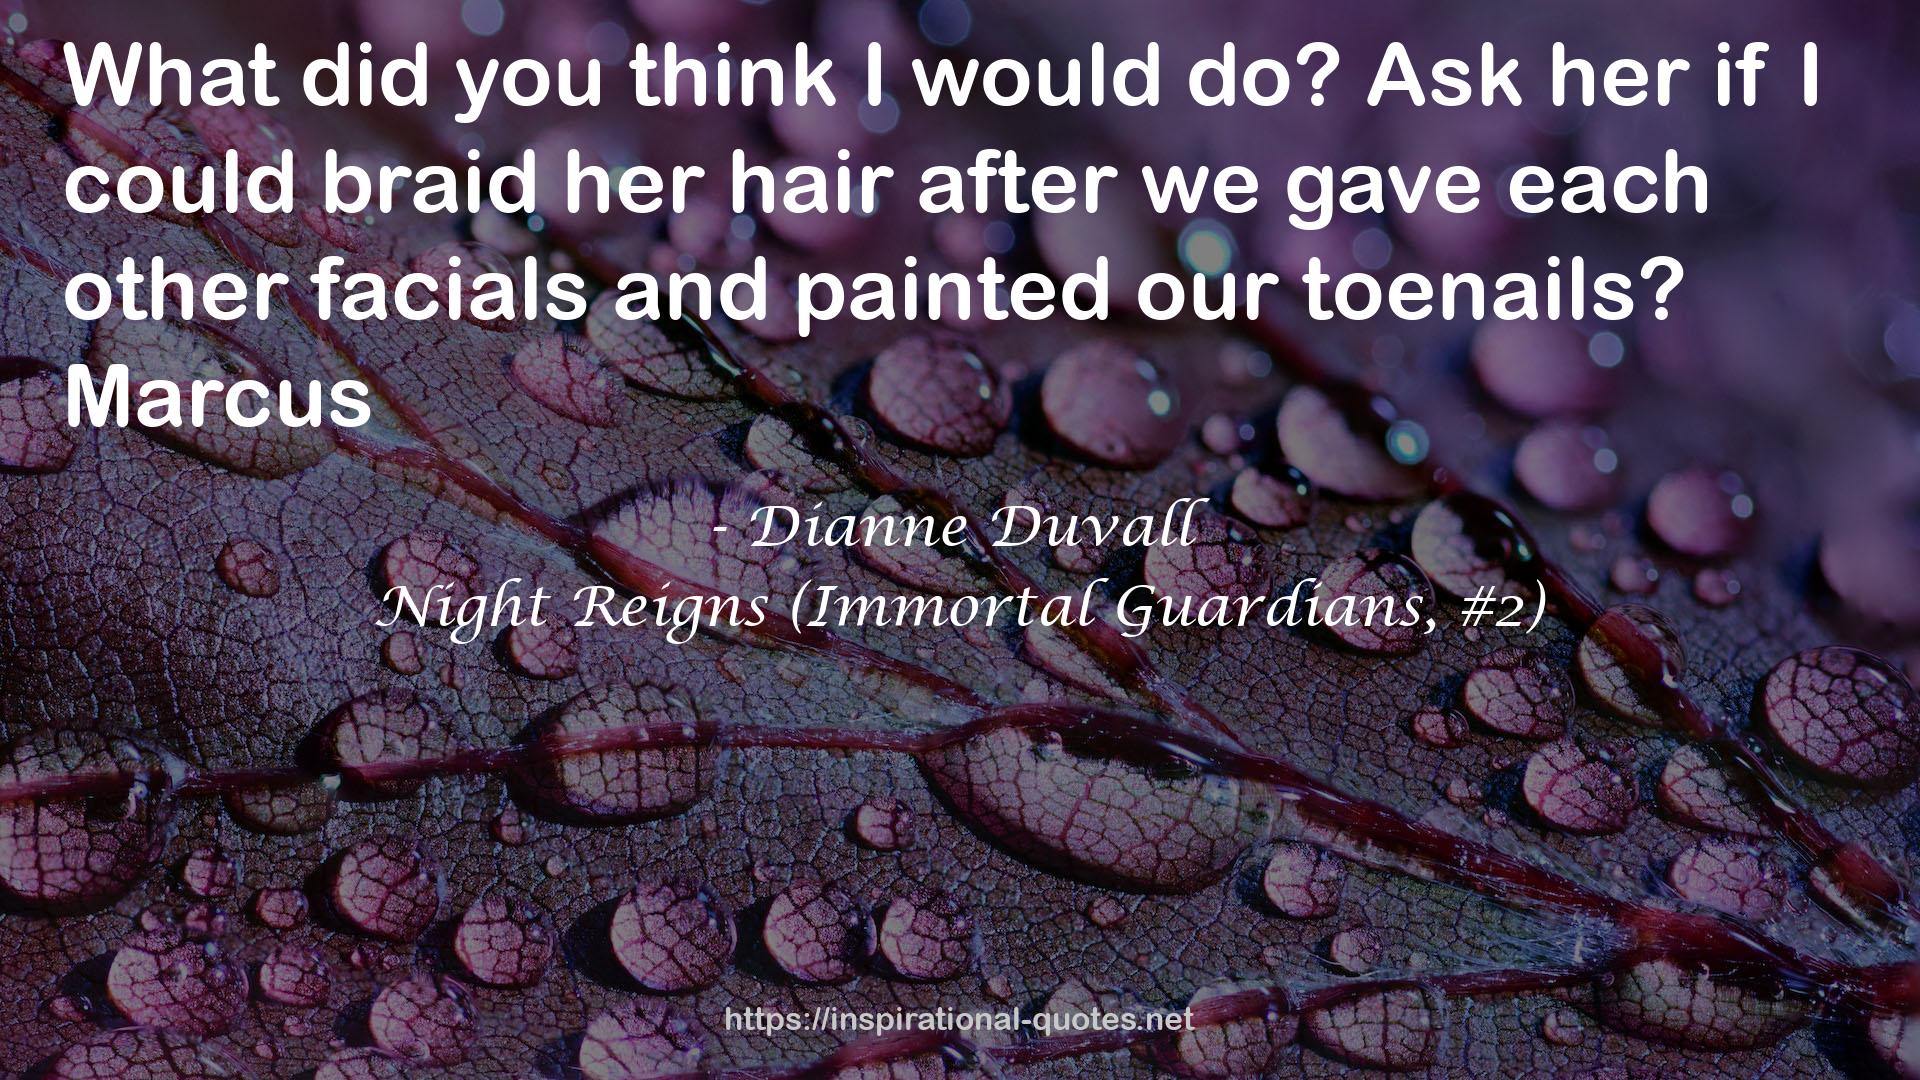 Dianne Duvall QUOTES